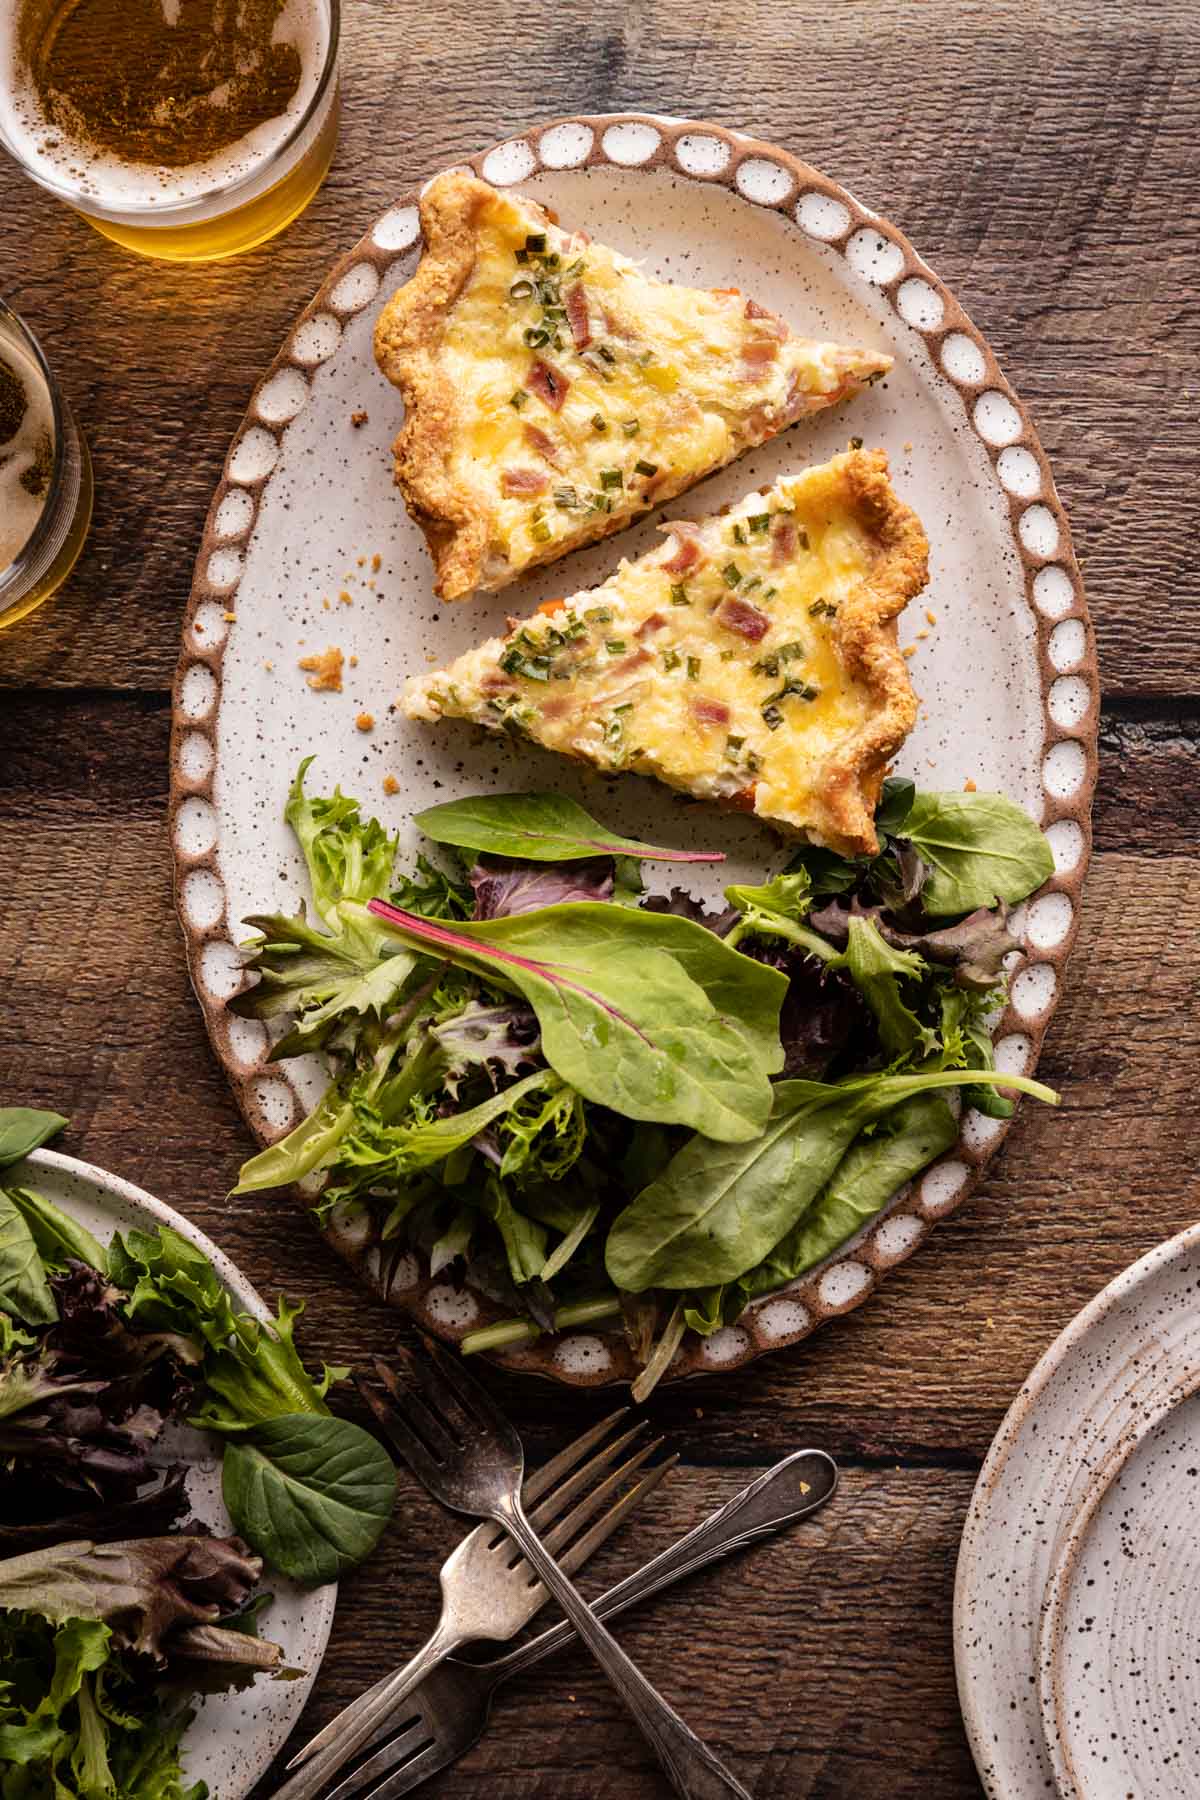 Two slices of quiche on a plate with salad greens